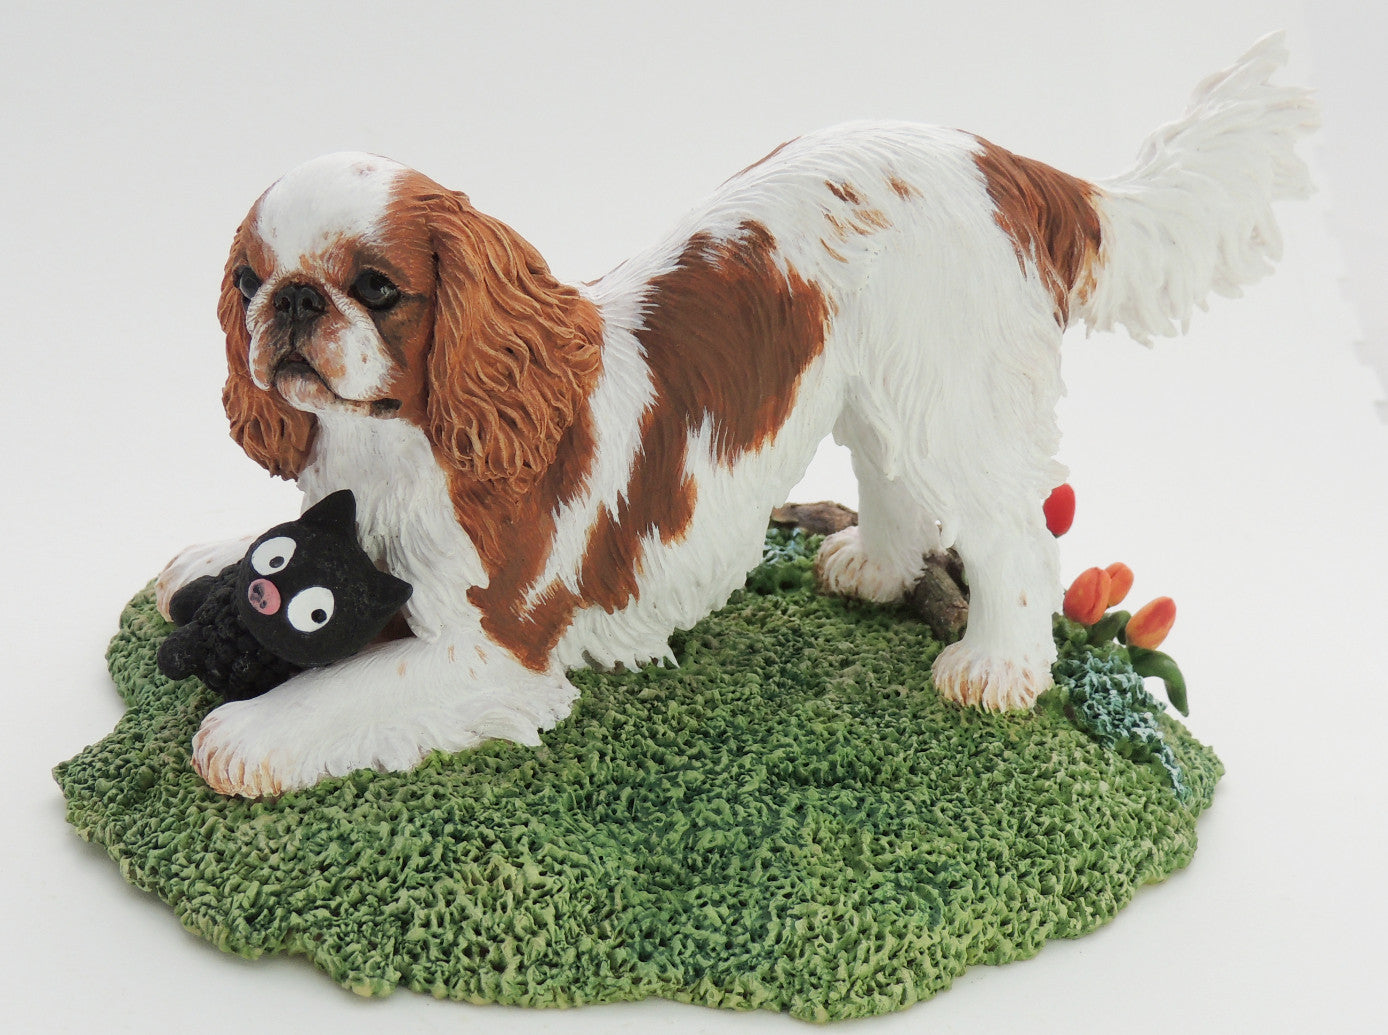 Original Sculpture of a Playful King Charles Spaniel (English Toy)